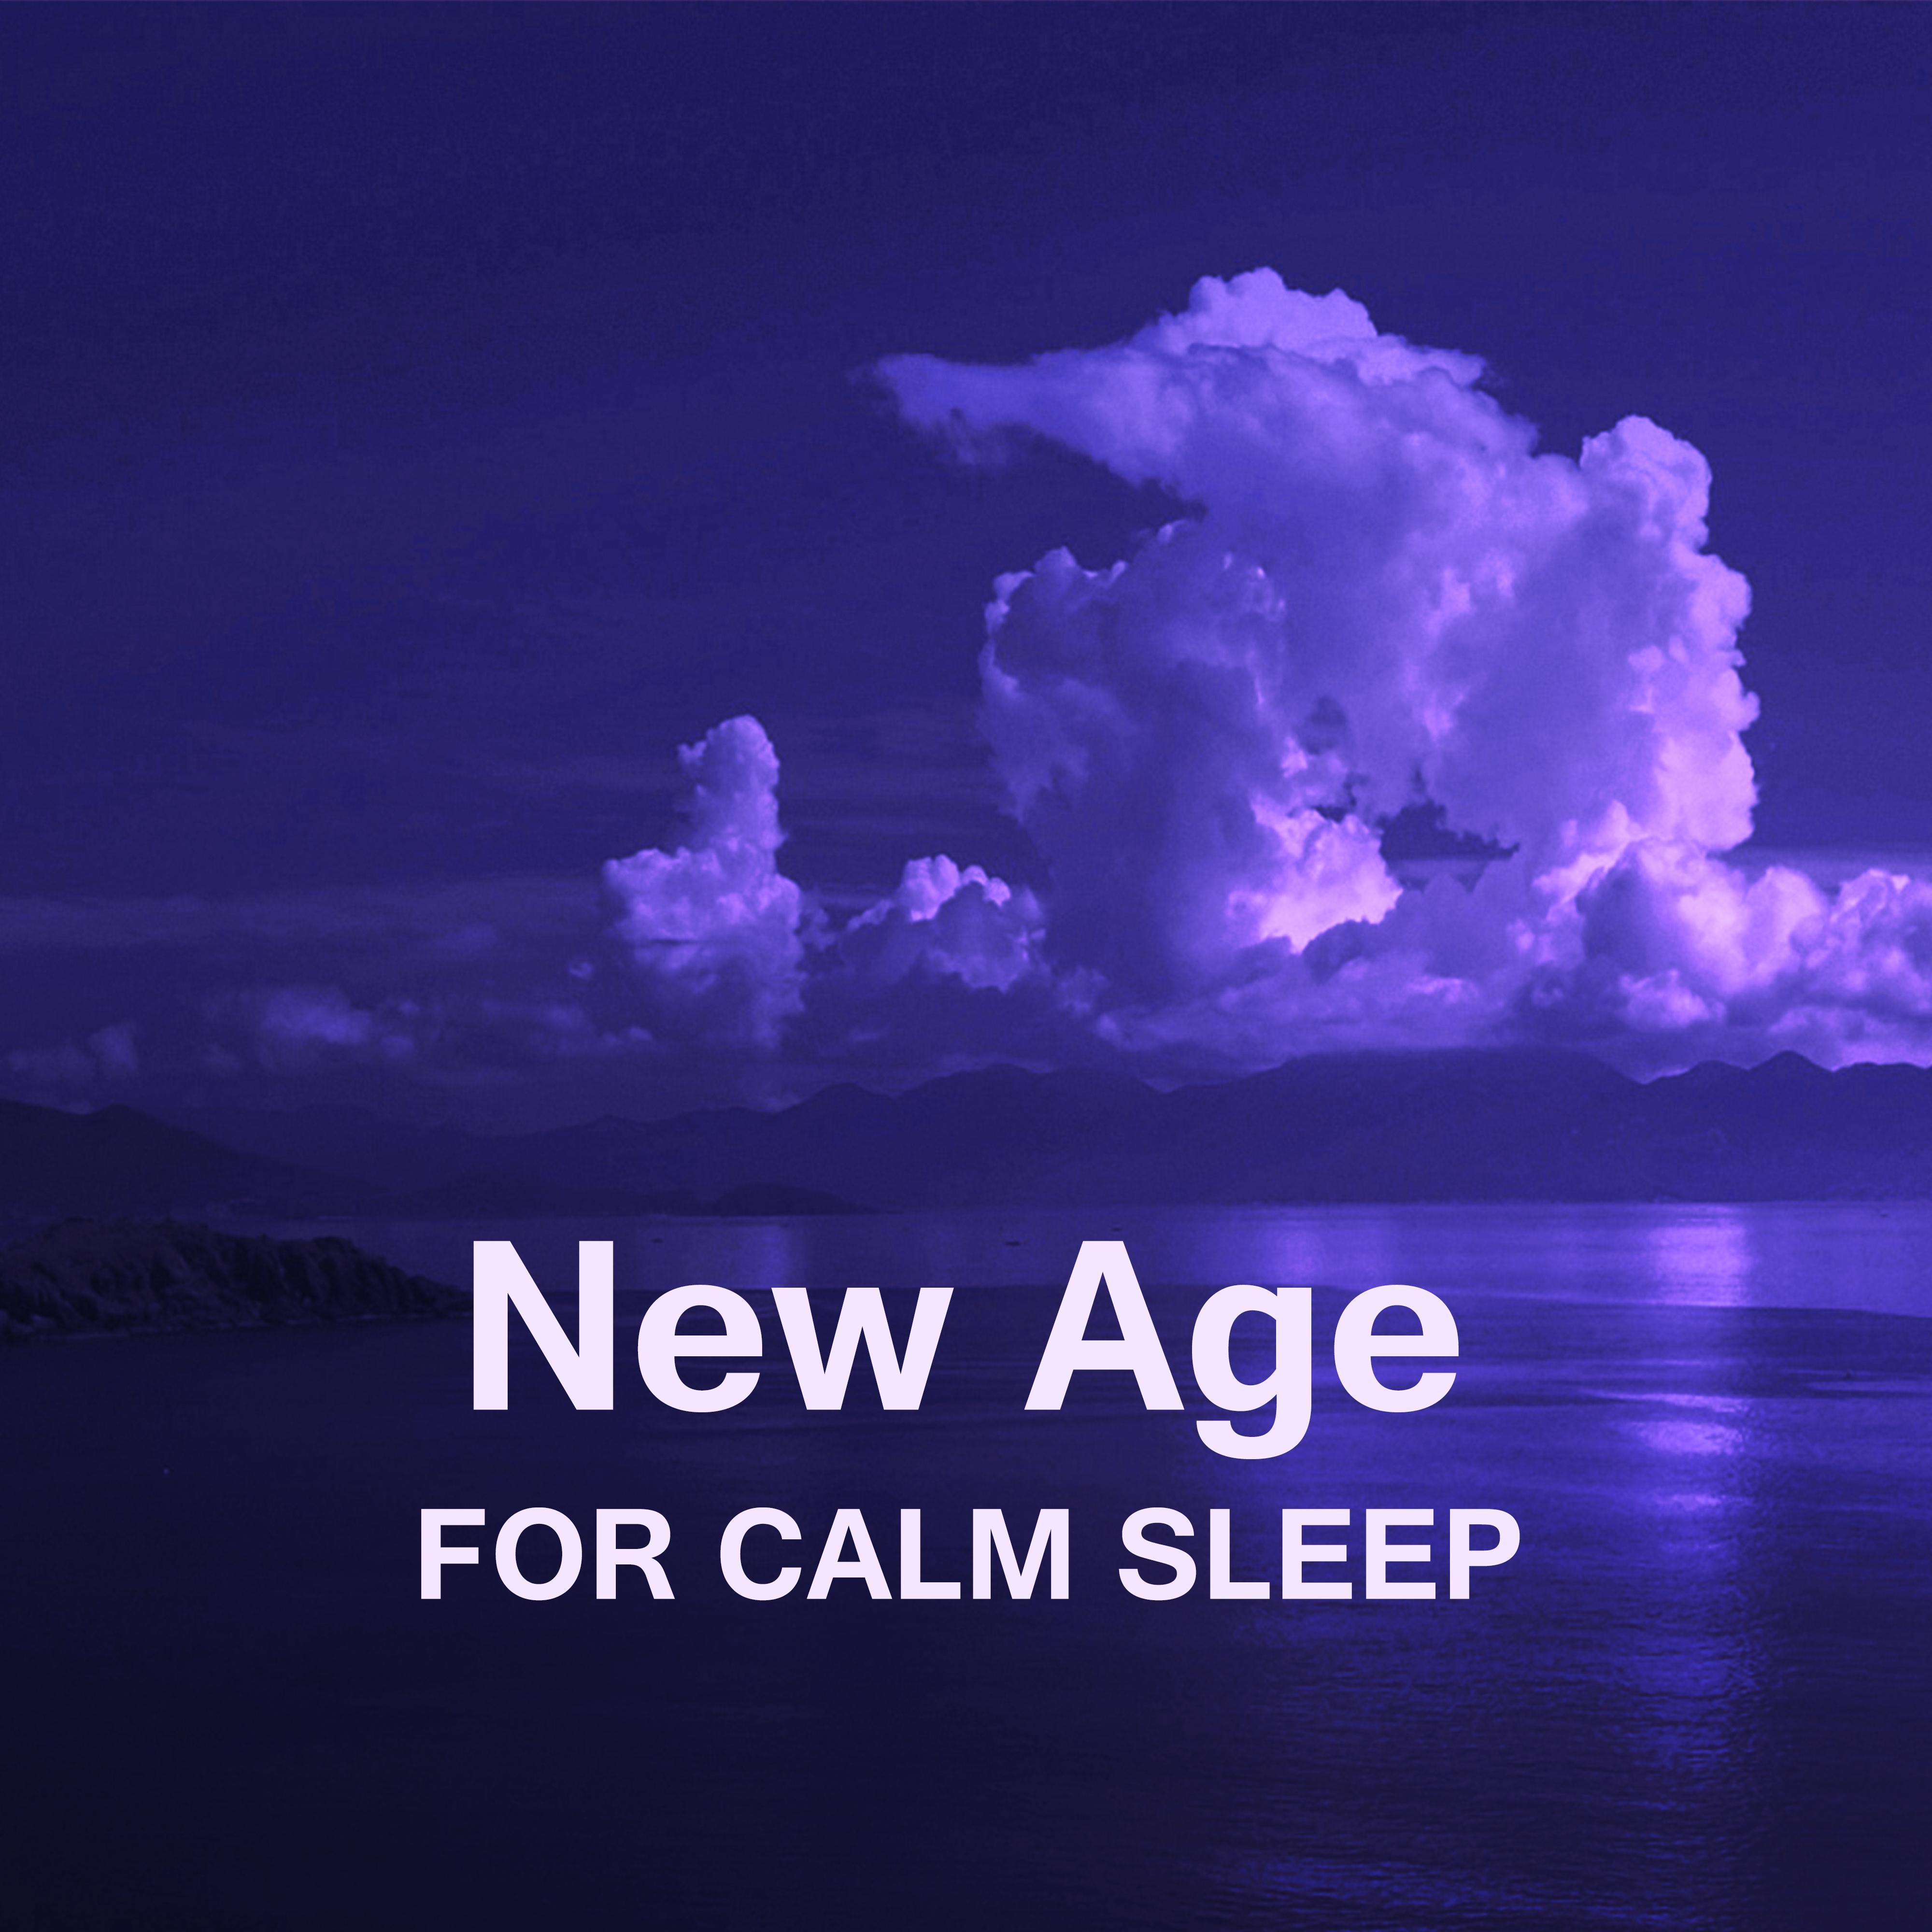 New Age for Calm Sleep  Rest with New Age, Sleep Well, Sweet Dreams, Peaceful Night